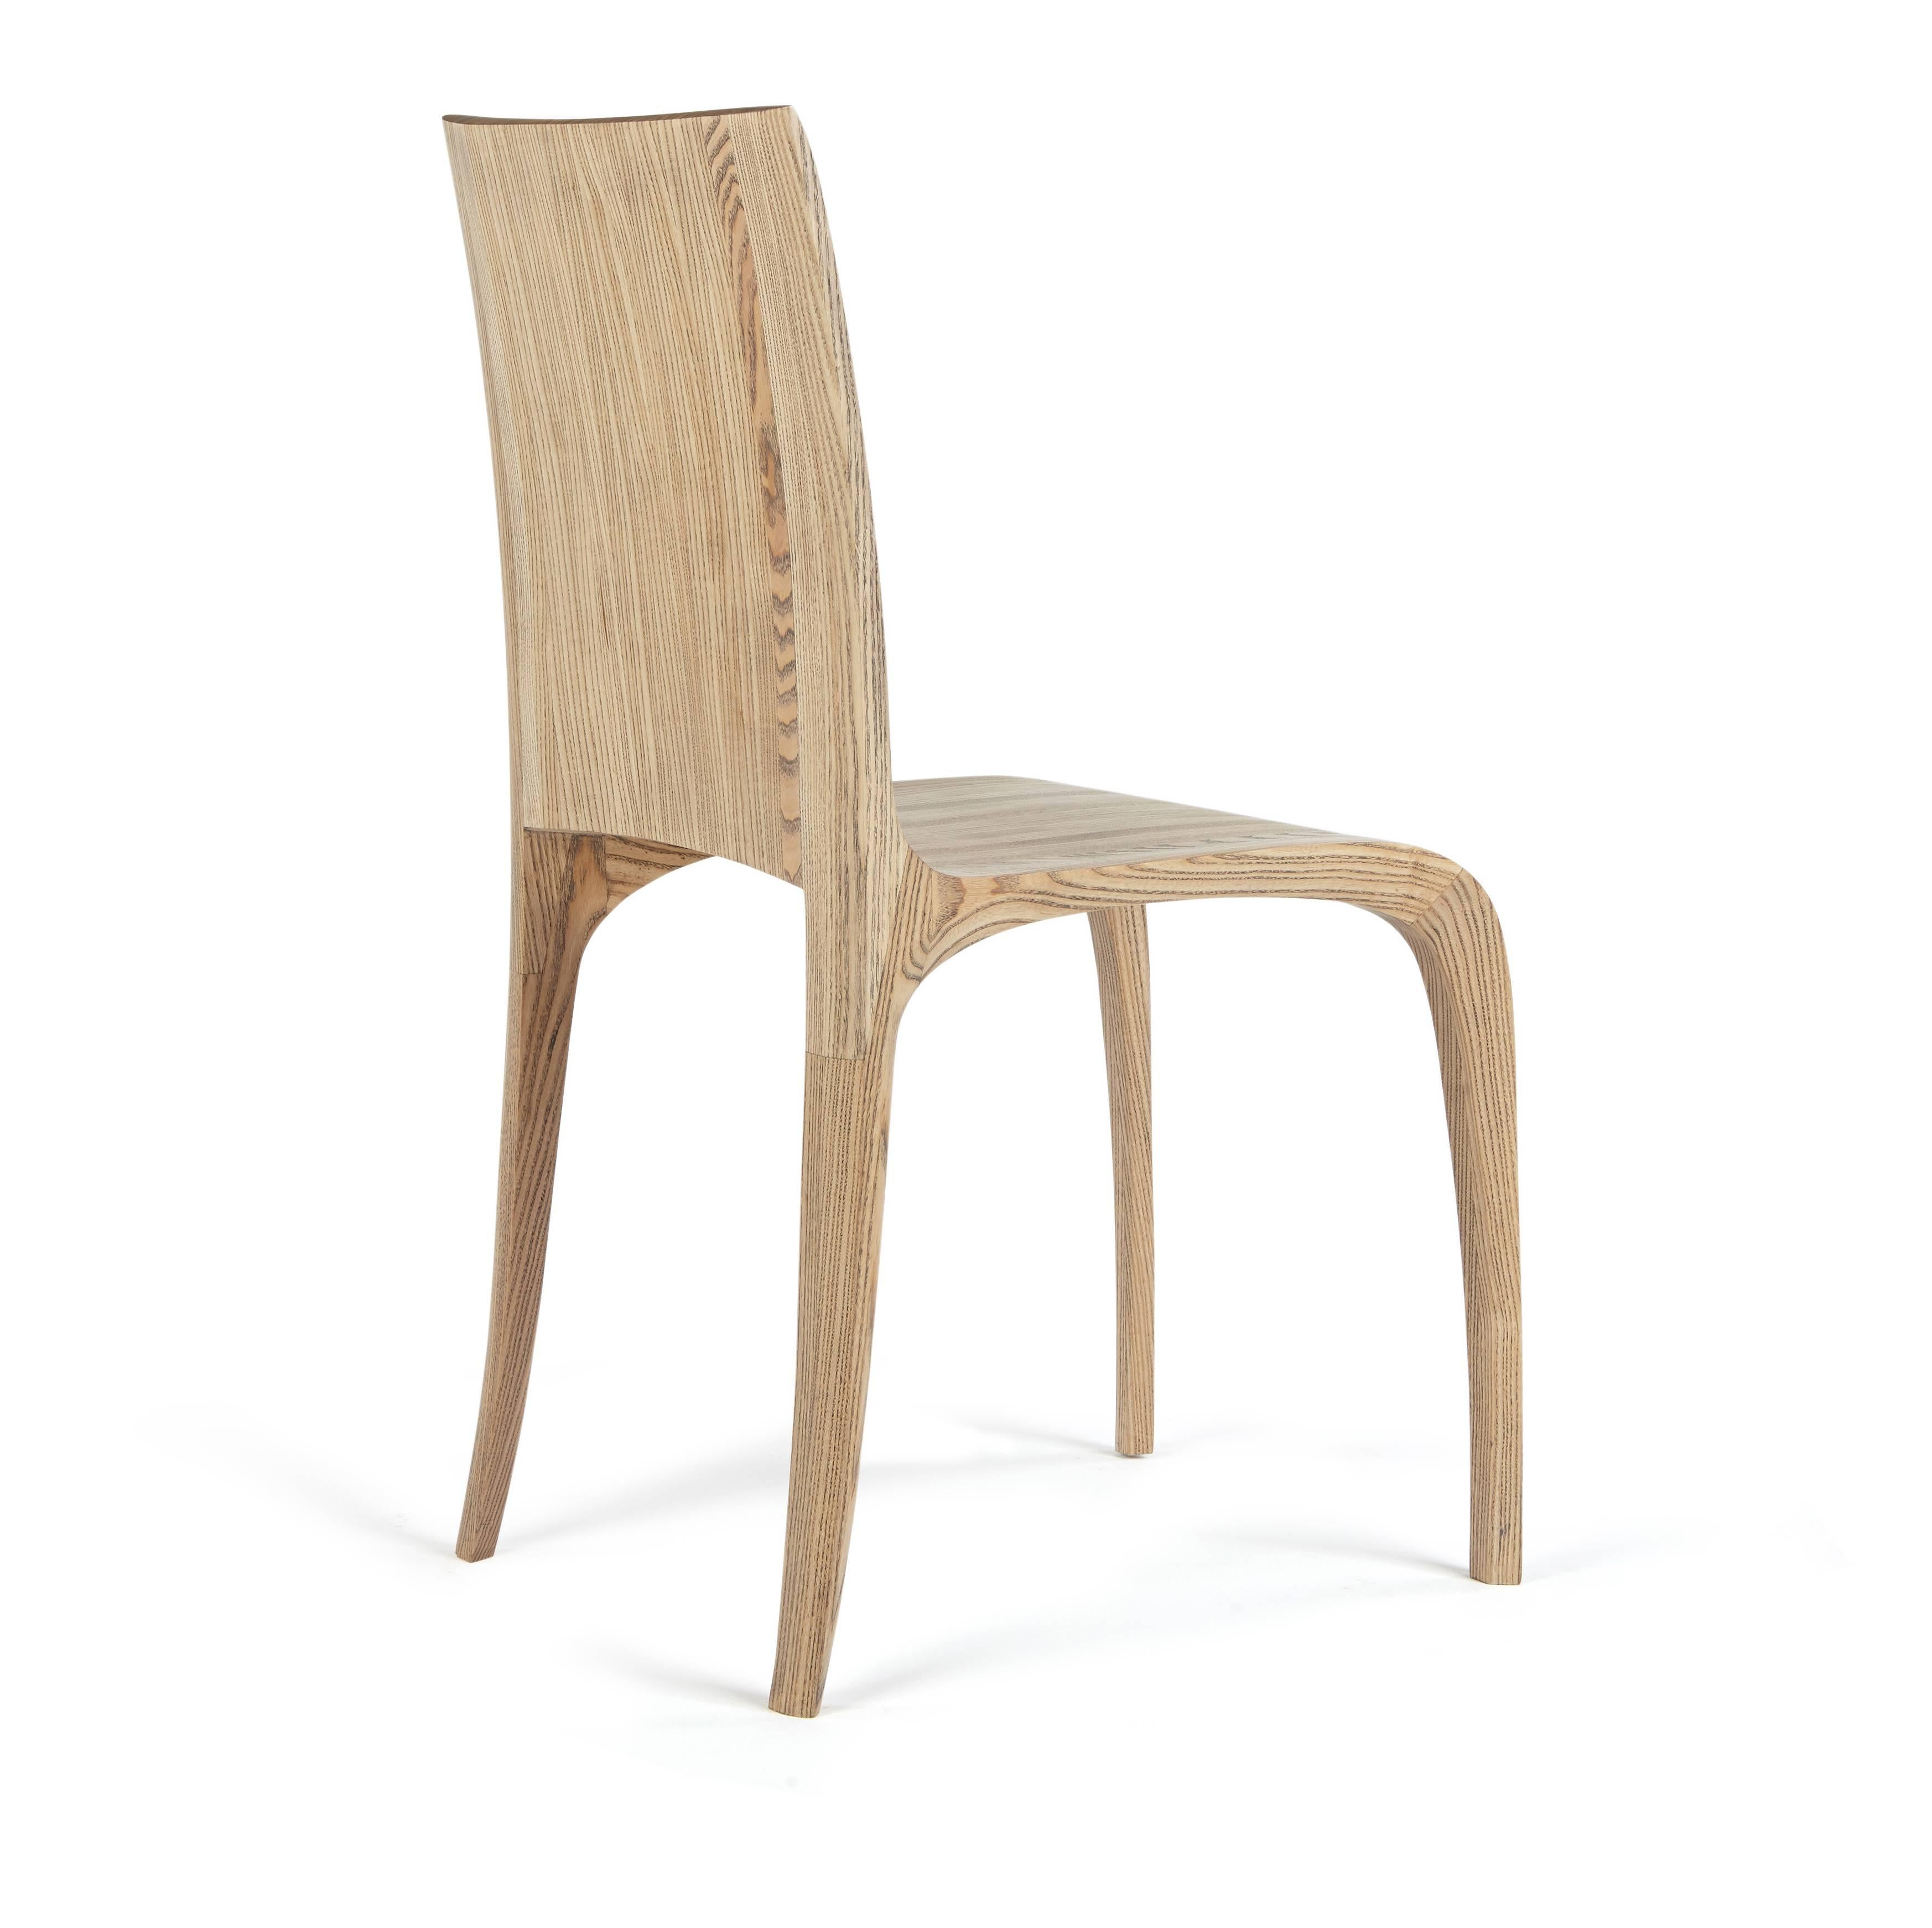 Chair in rippled ash (design no 4) was made in an edition of 10.
It was awarded a Bespoke Guild Mark award by The Worshipful Company of Furniture Maker’s in London, UK. ( Ref BGM 462 Dining Chair)
The Bespoke Guild Mark rewards excellence in design,